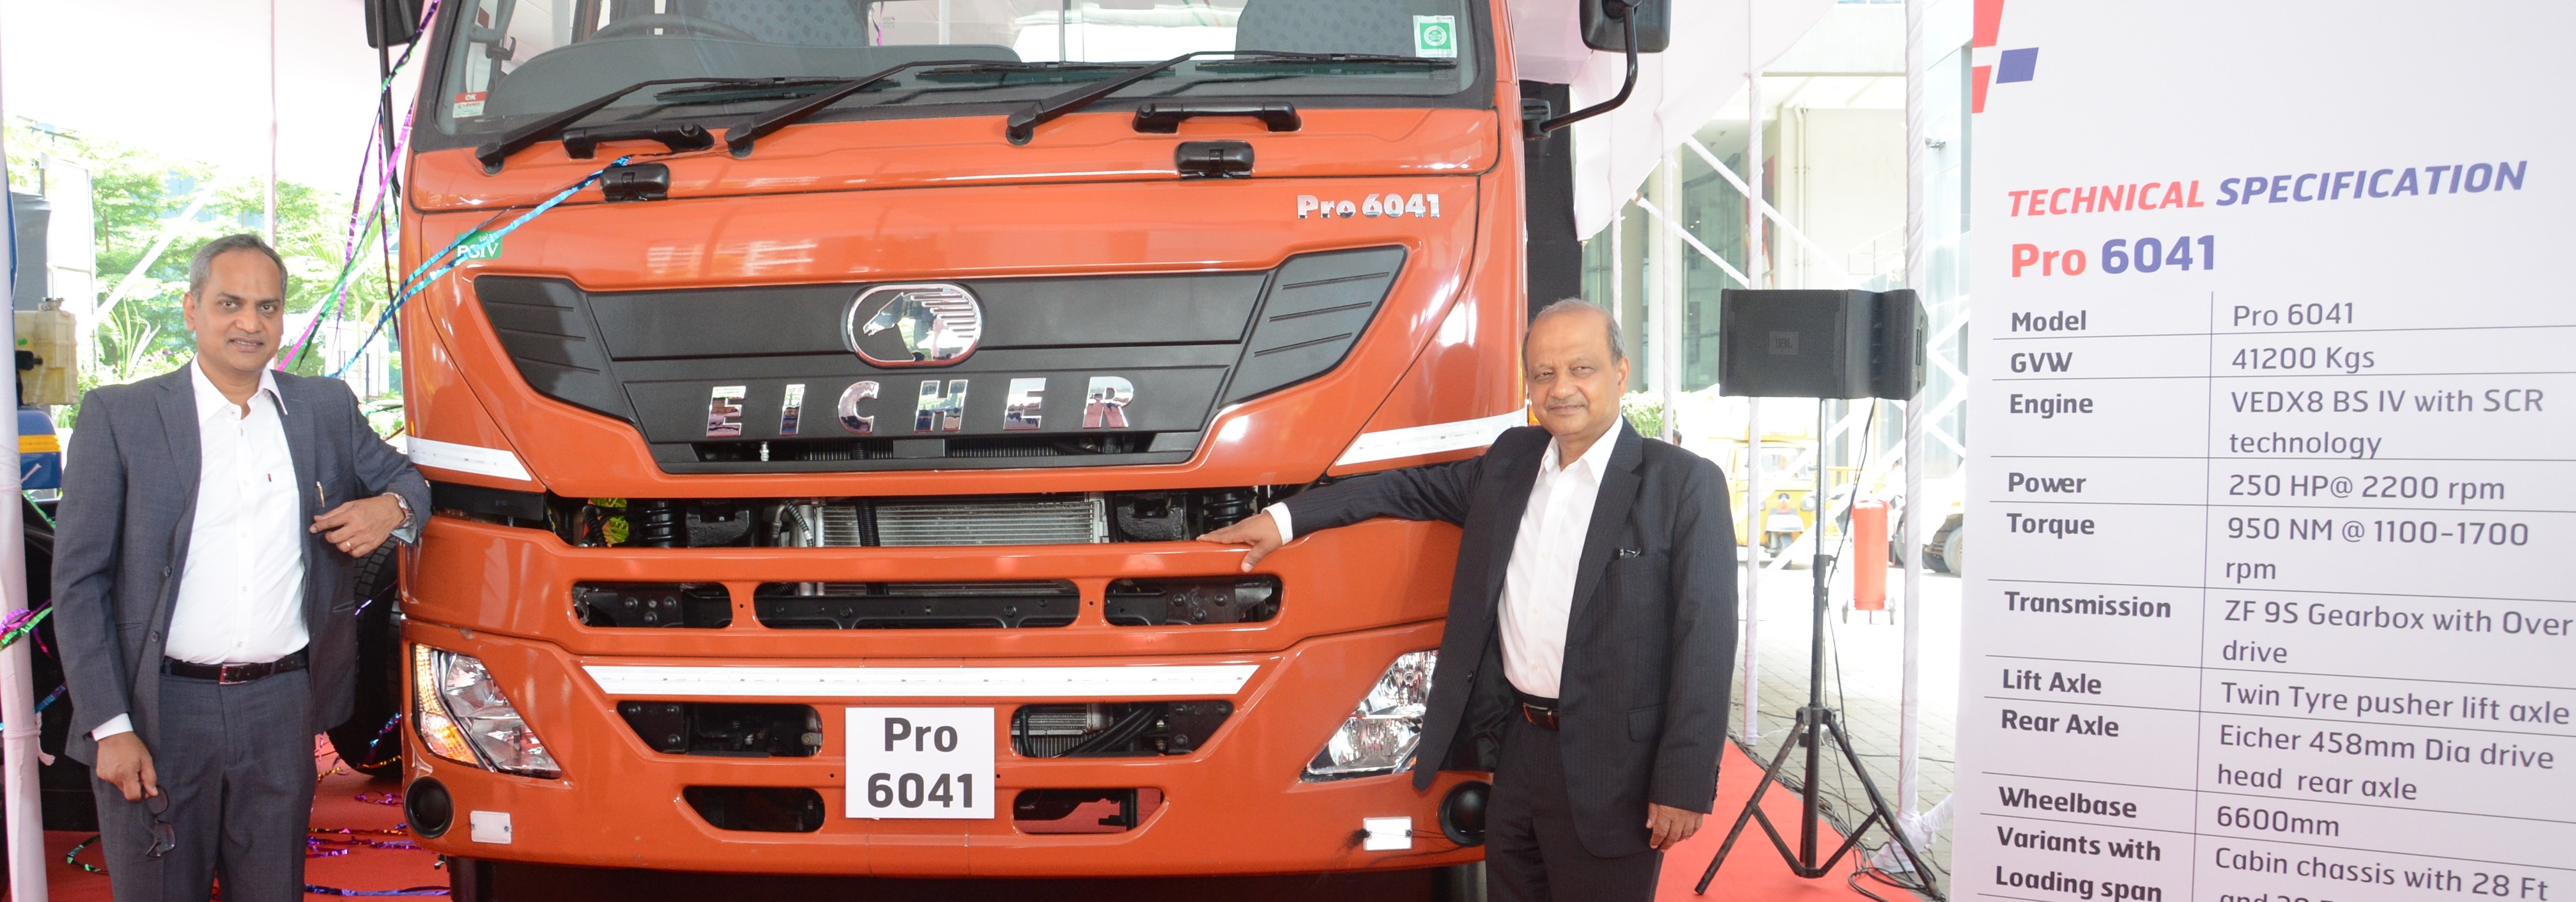 Introducing India\'s first 41.2 ton GVW heavy duty truck, Eicher Pro 6041